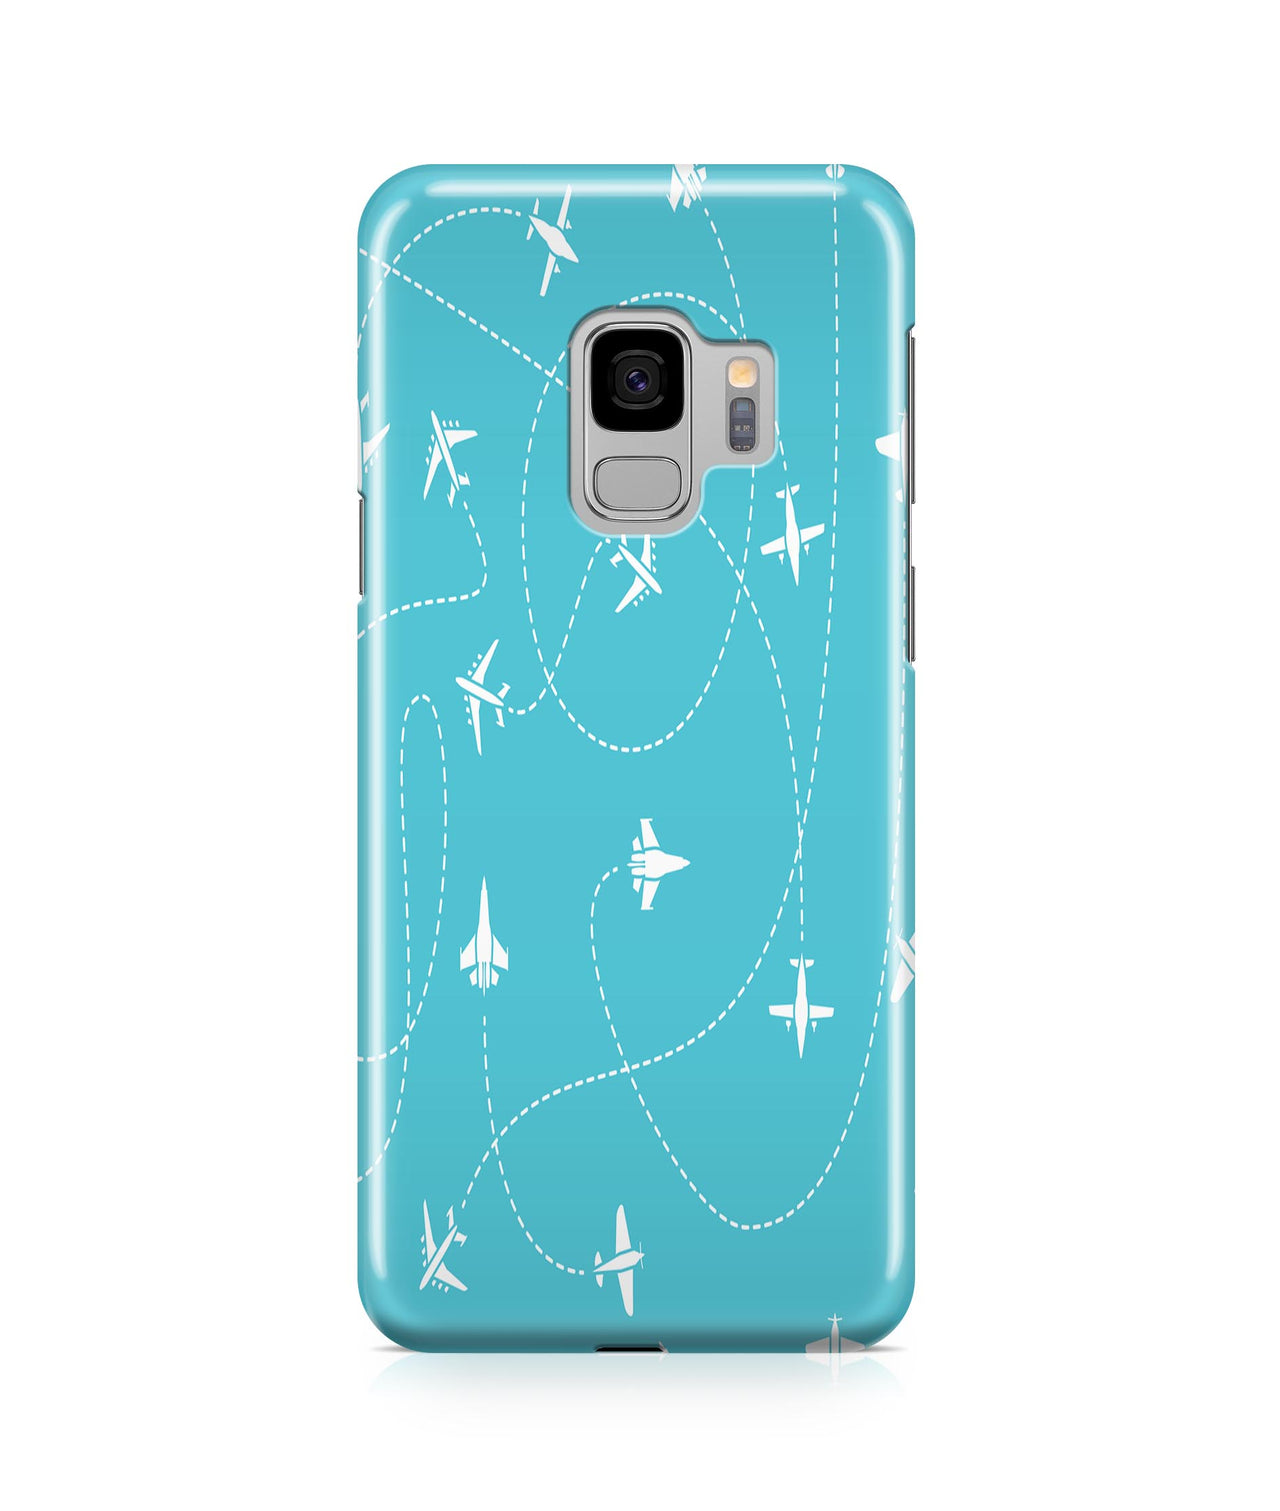 Travel The World By Plane Printed Samsung J Cases